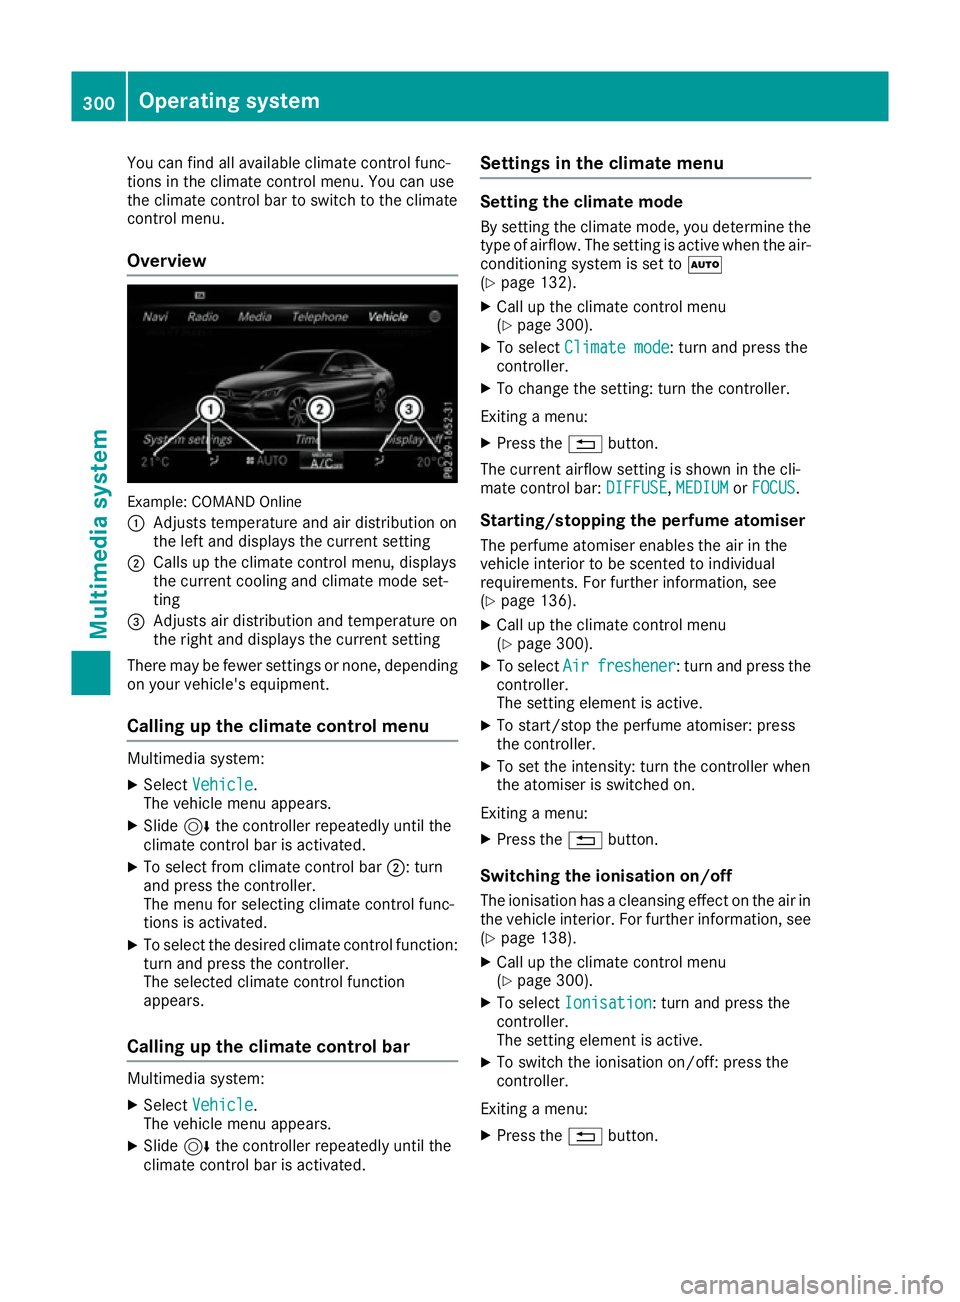 MERCEDES-BENZ C-CLASS COUPE 2015  Owners Manual You can fin
dall available climat econtrol func-
tion sint he climat econtrol menu. You can use
the climat econtrol bar to switc htothe climate
control menu.
Overview Example: COMAN
DOnline
: Adjusts 